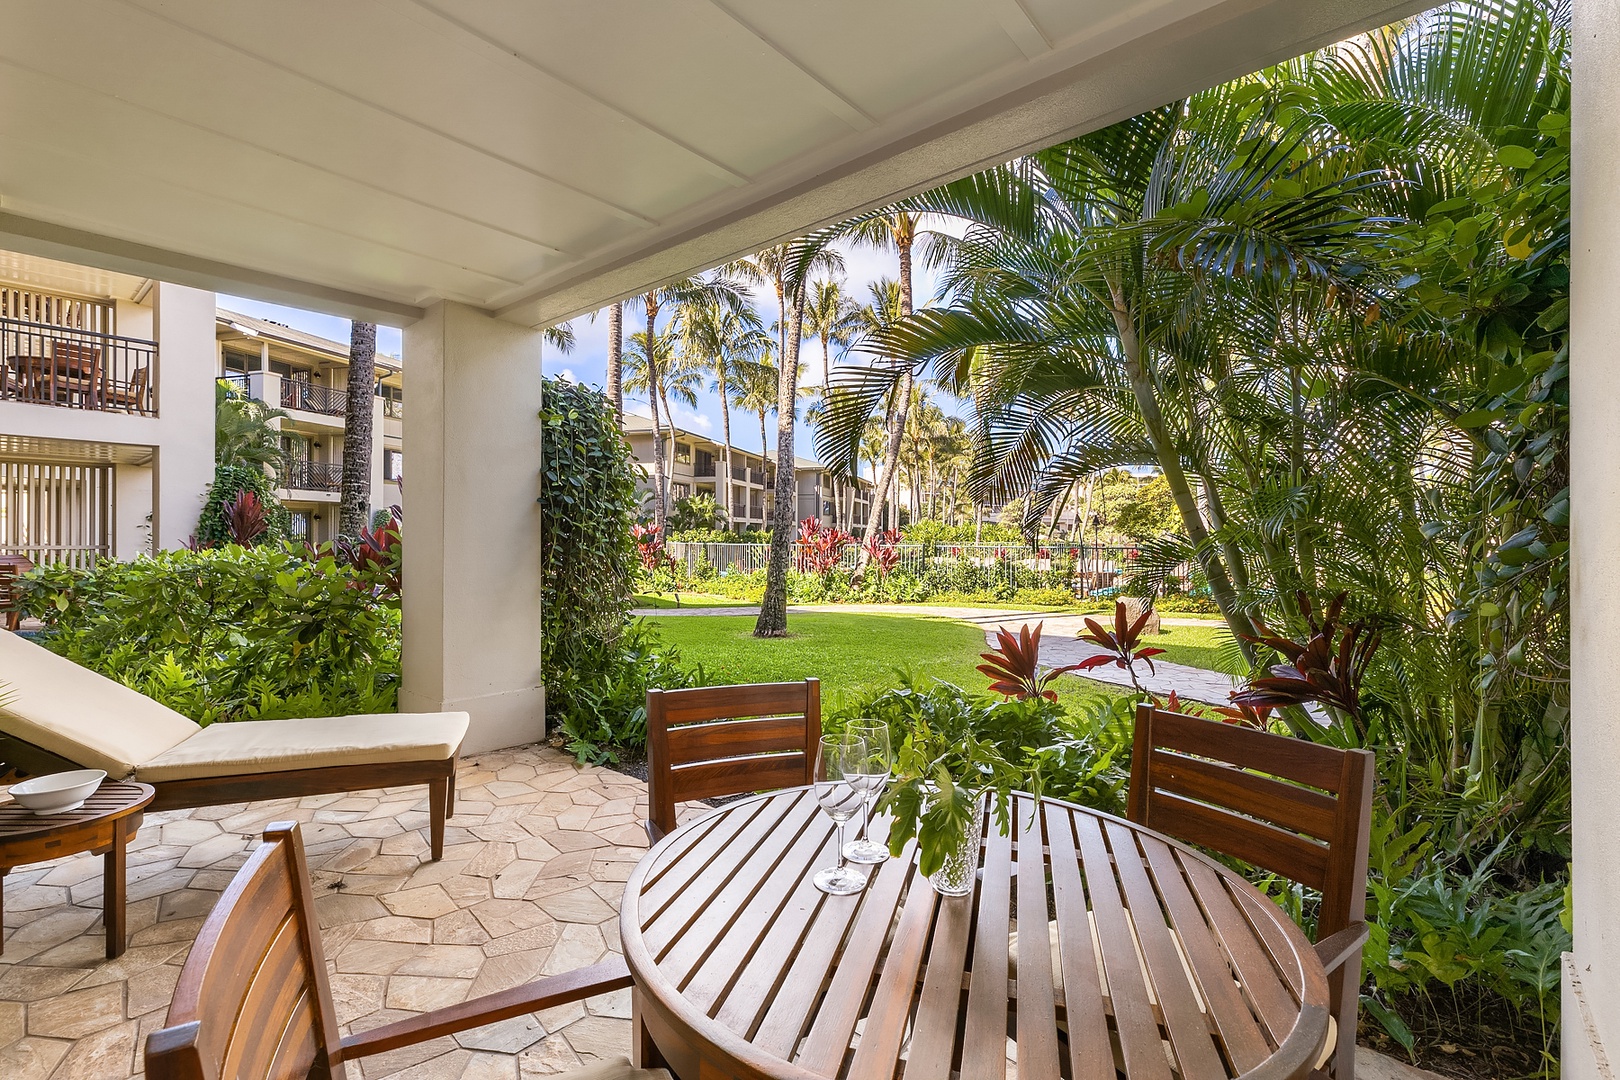 Kahuku Vacation Rentals, Turtle Bay Villas 112 - Ground floor lanai with easy access to the pool and beach lagoon in front.